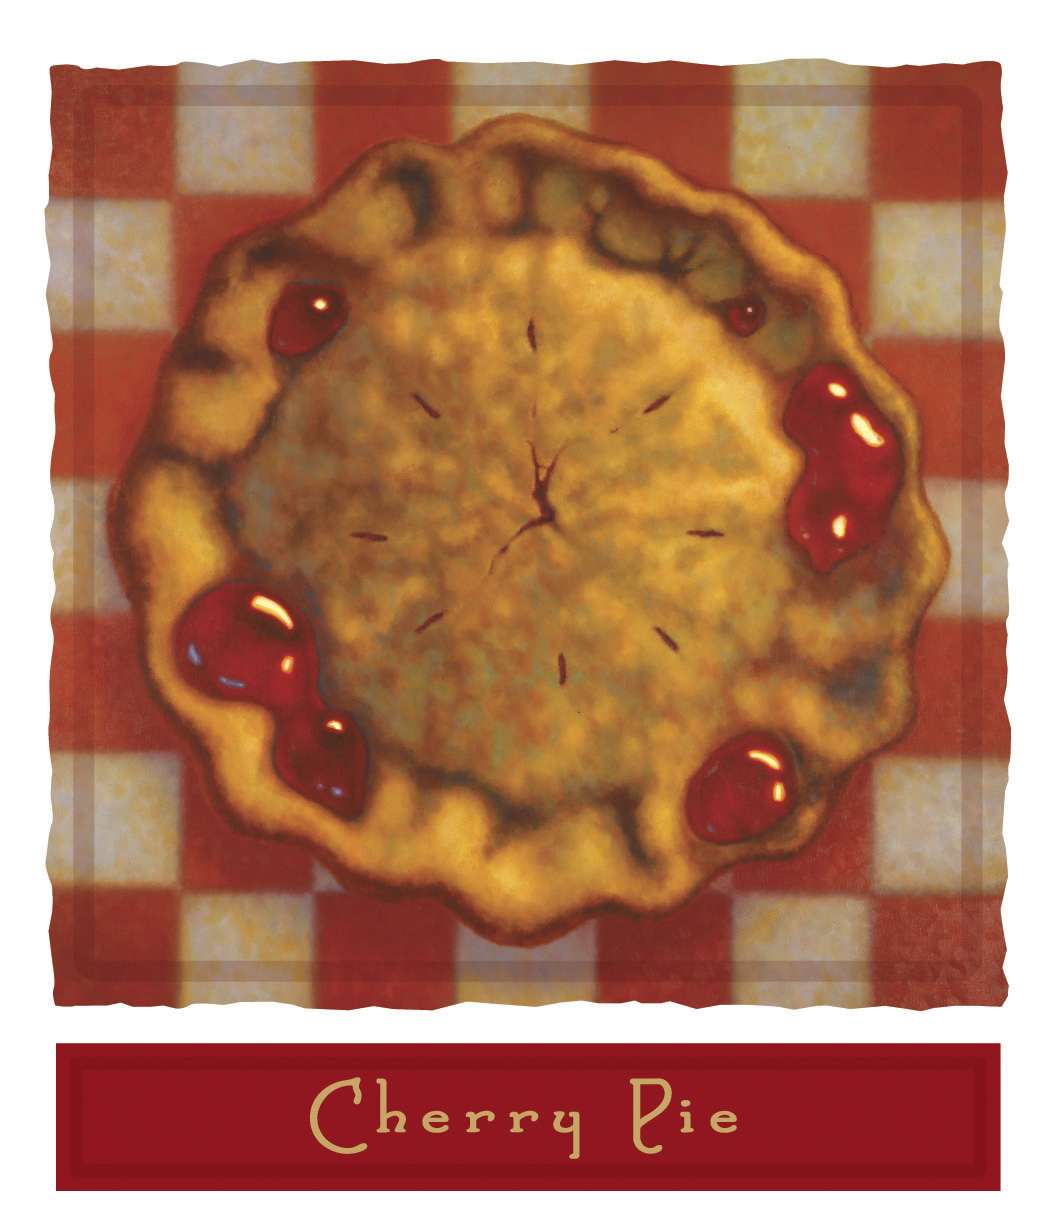 2015 Cherry Pie Pinot Noir Stanly Ranch - click image for full description